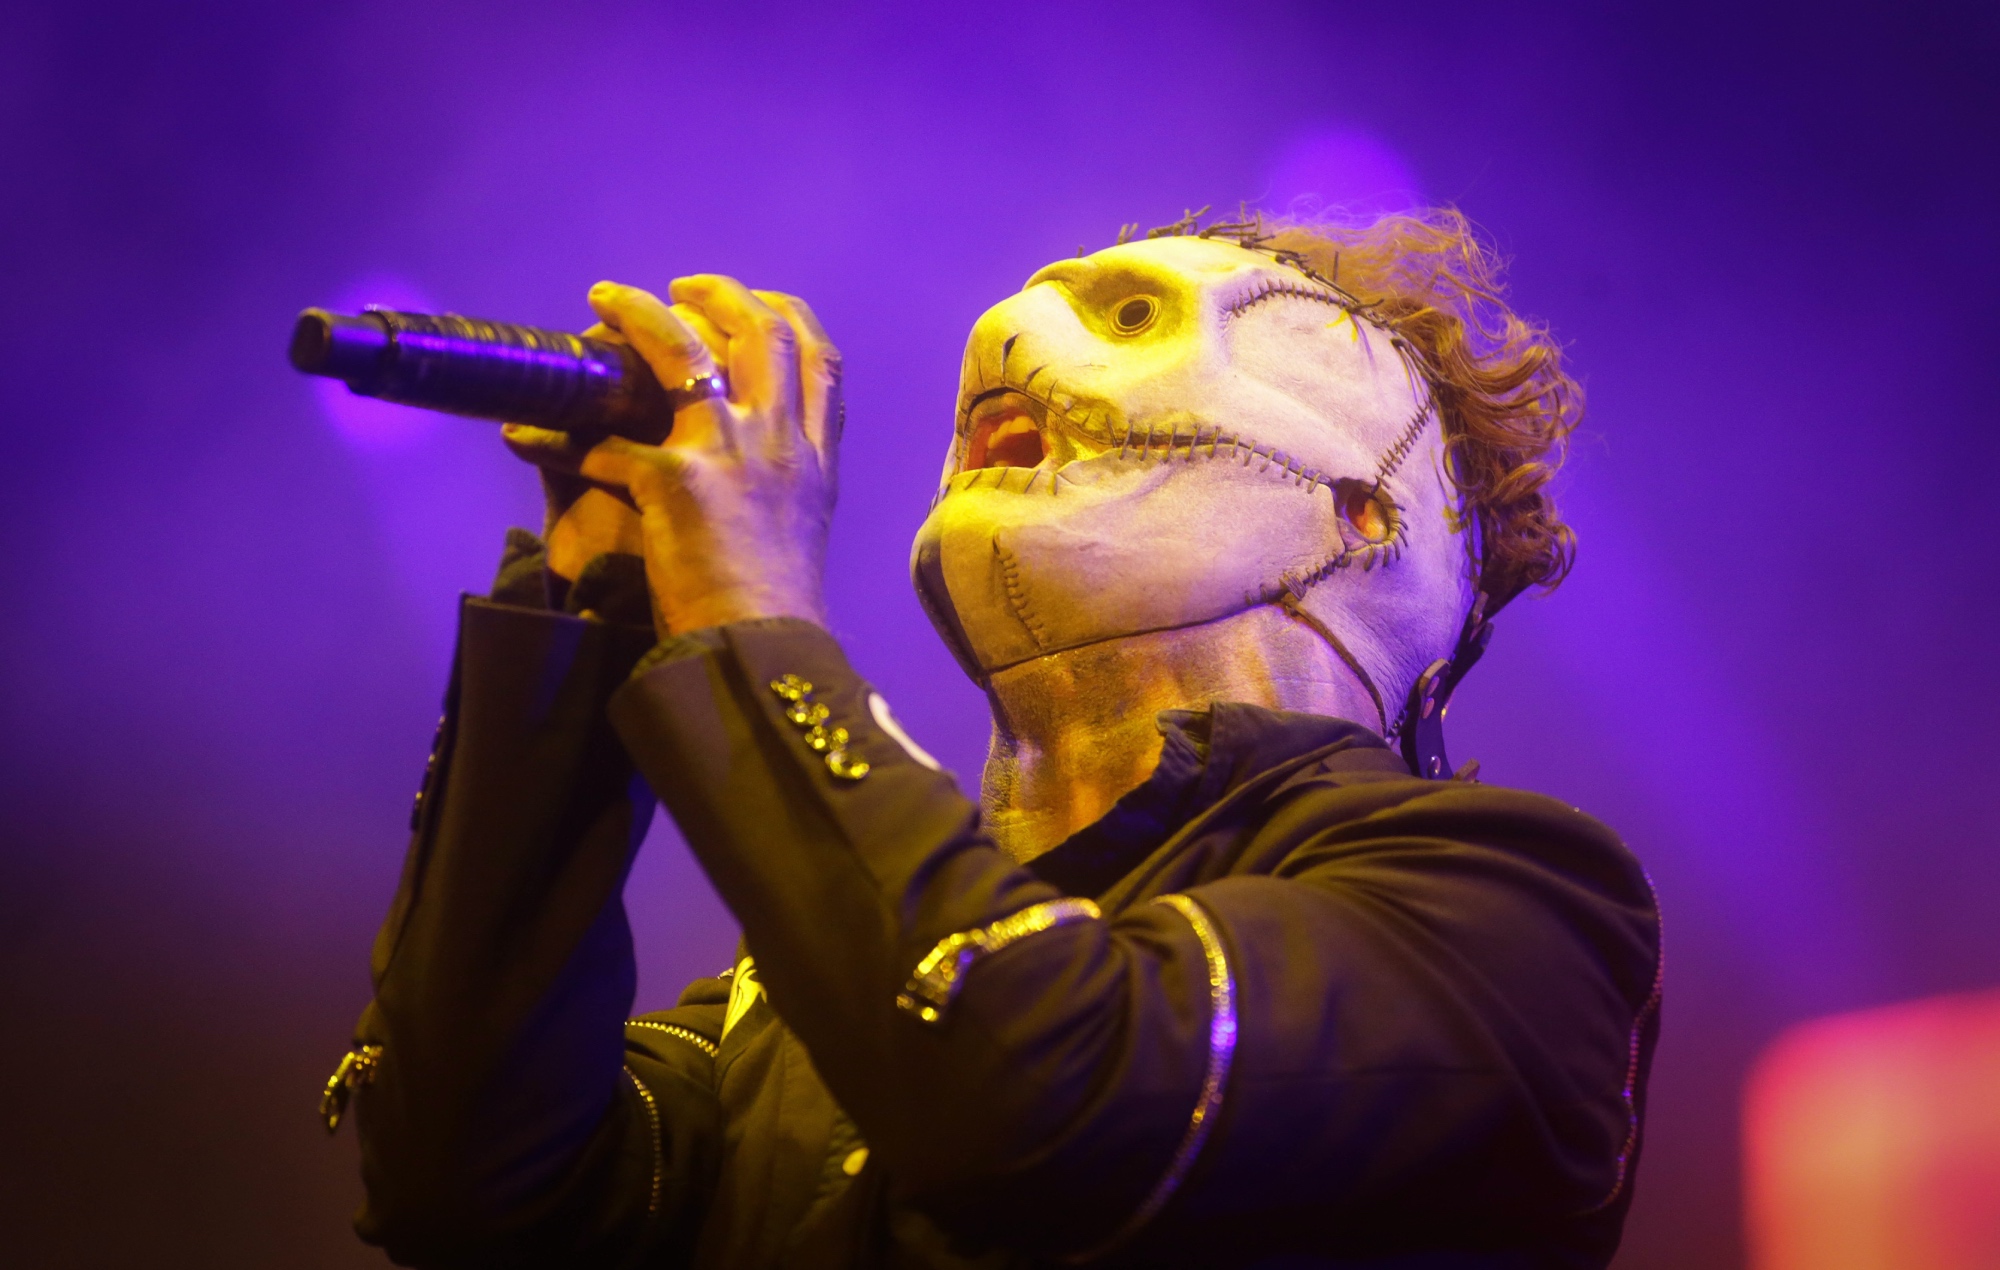 Corey Taylor says Slipknot are only “upper middle class”